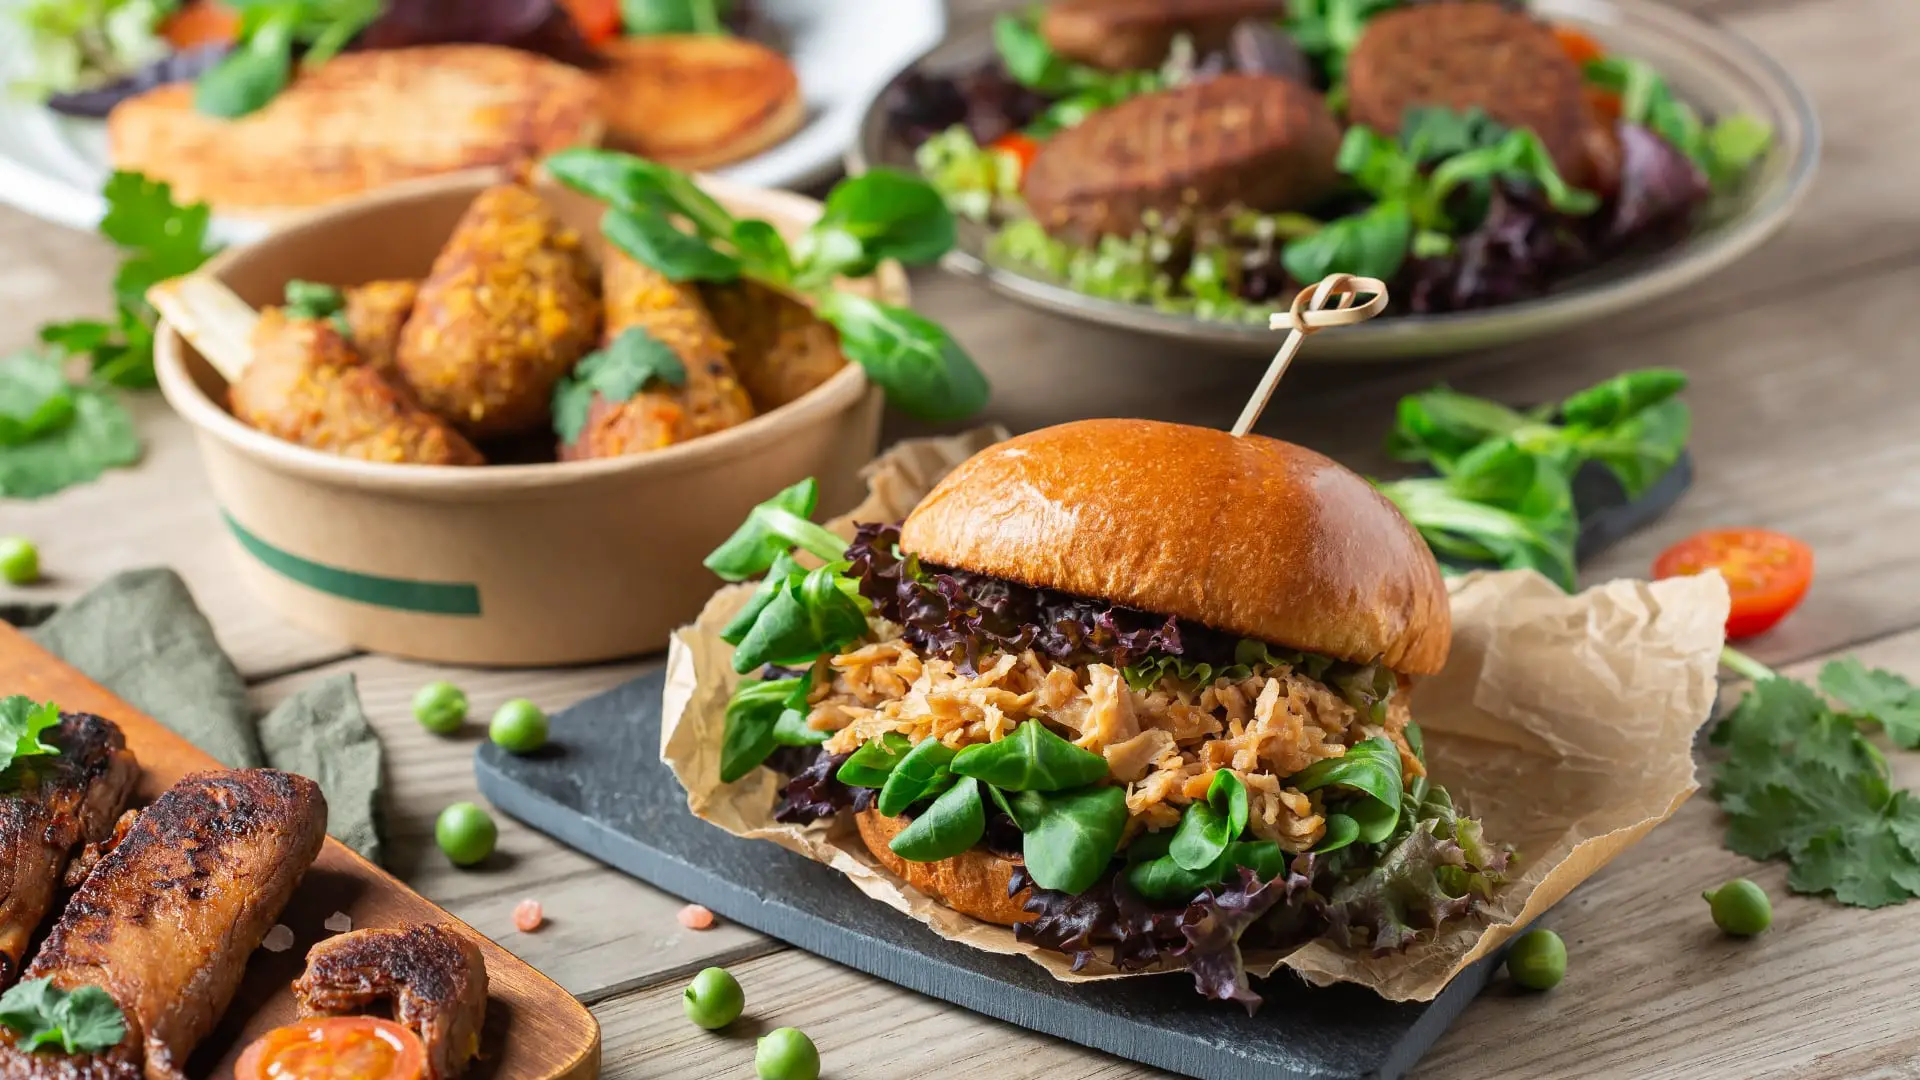 The Ultimate Guide to Dining Out on a Plant-Based or Vegan Diet